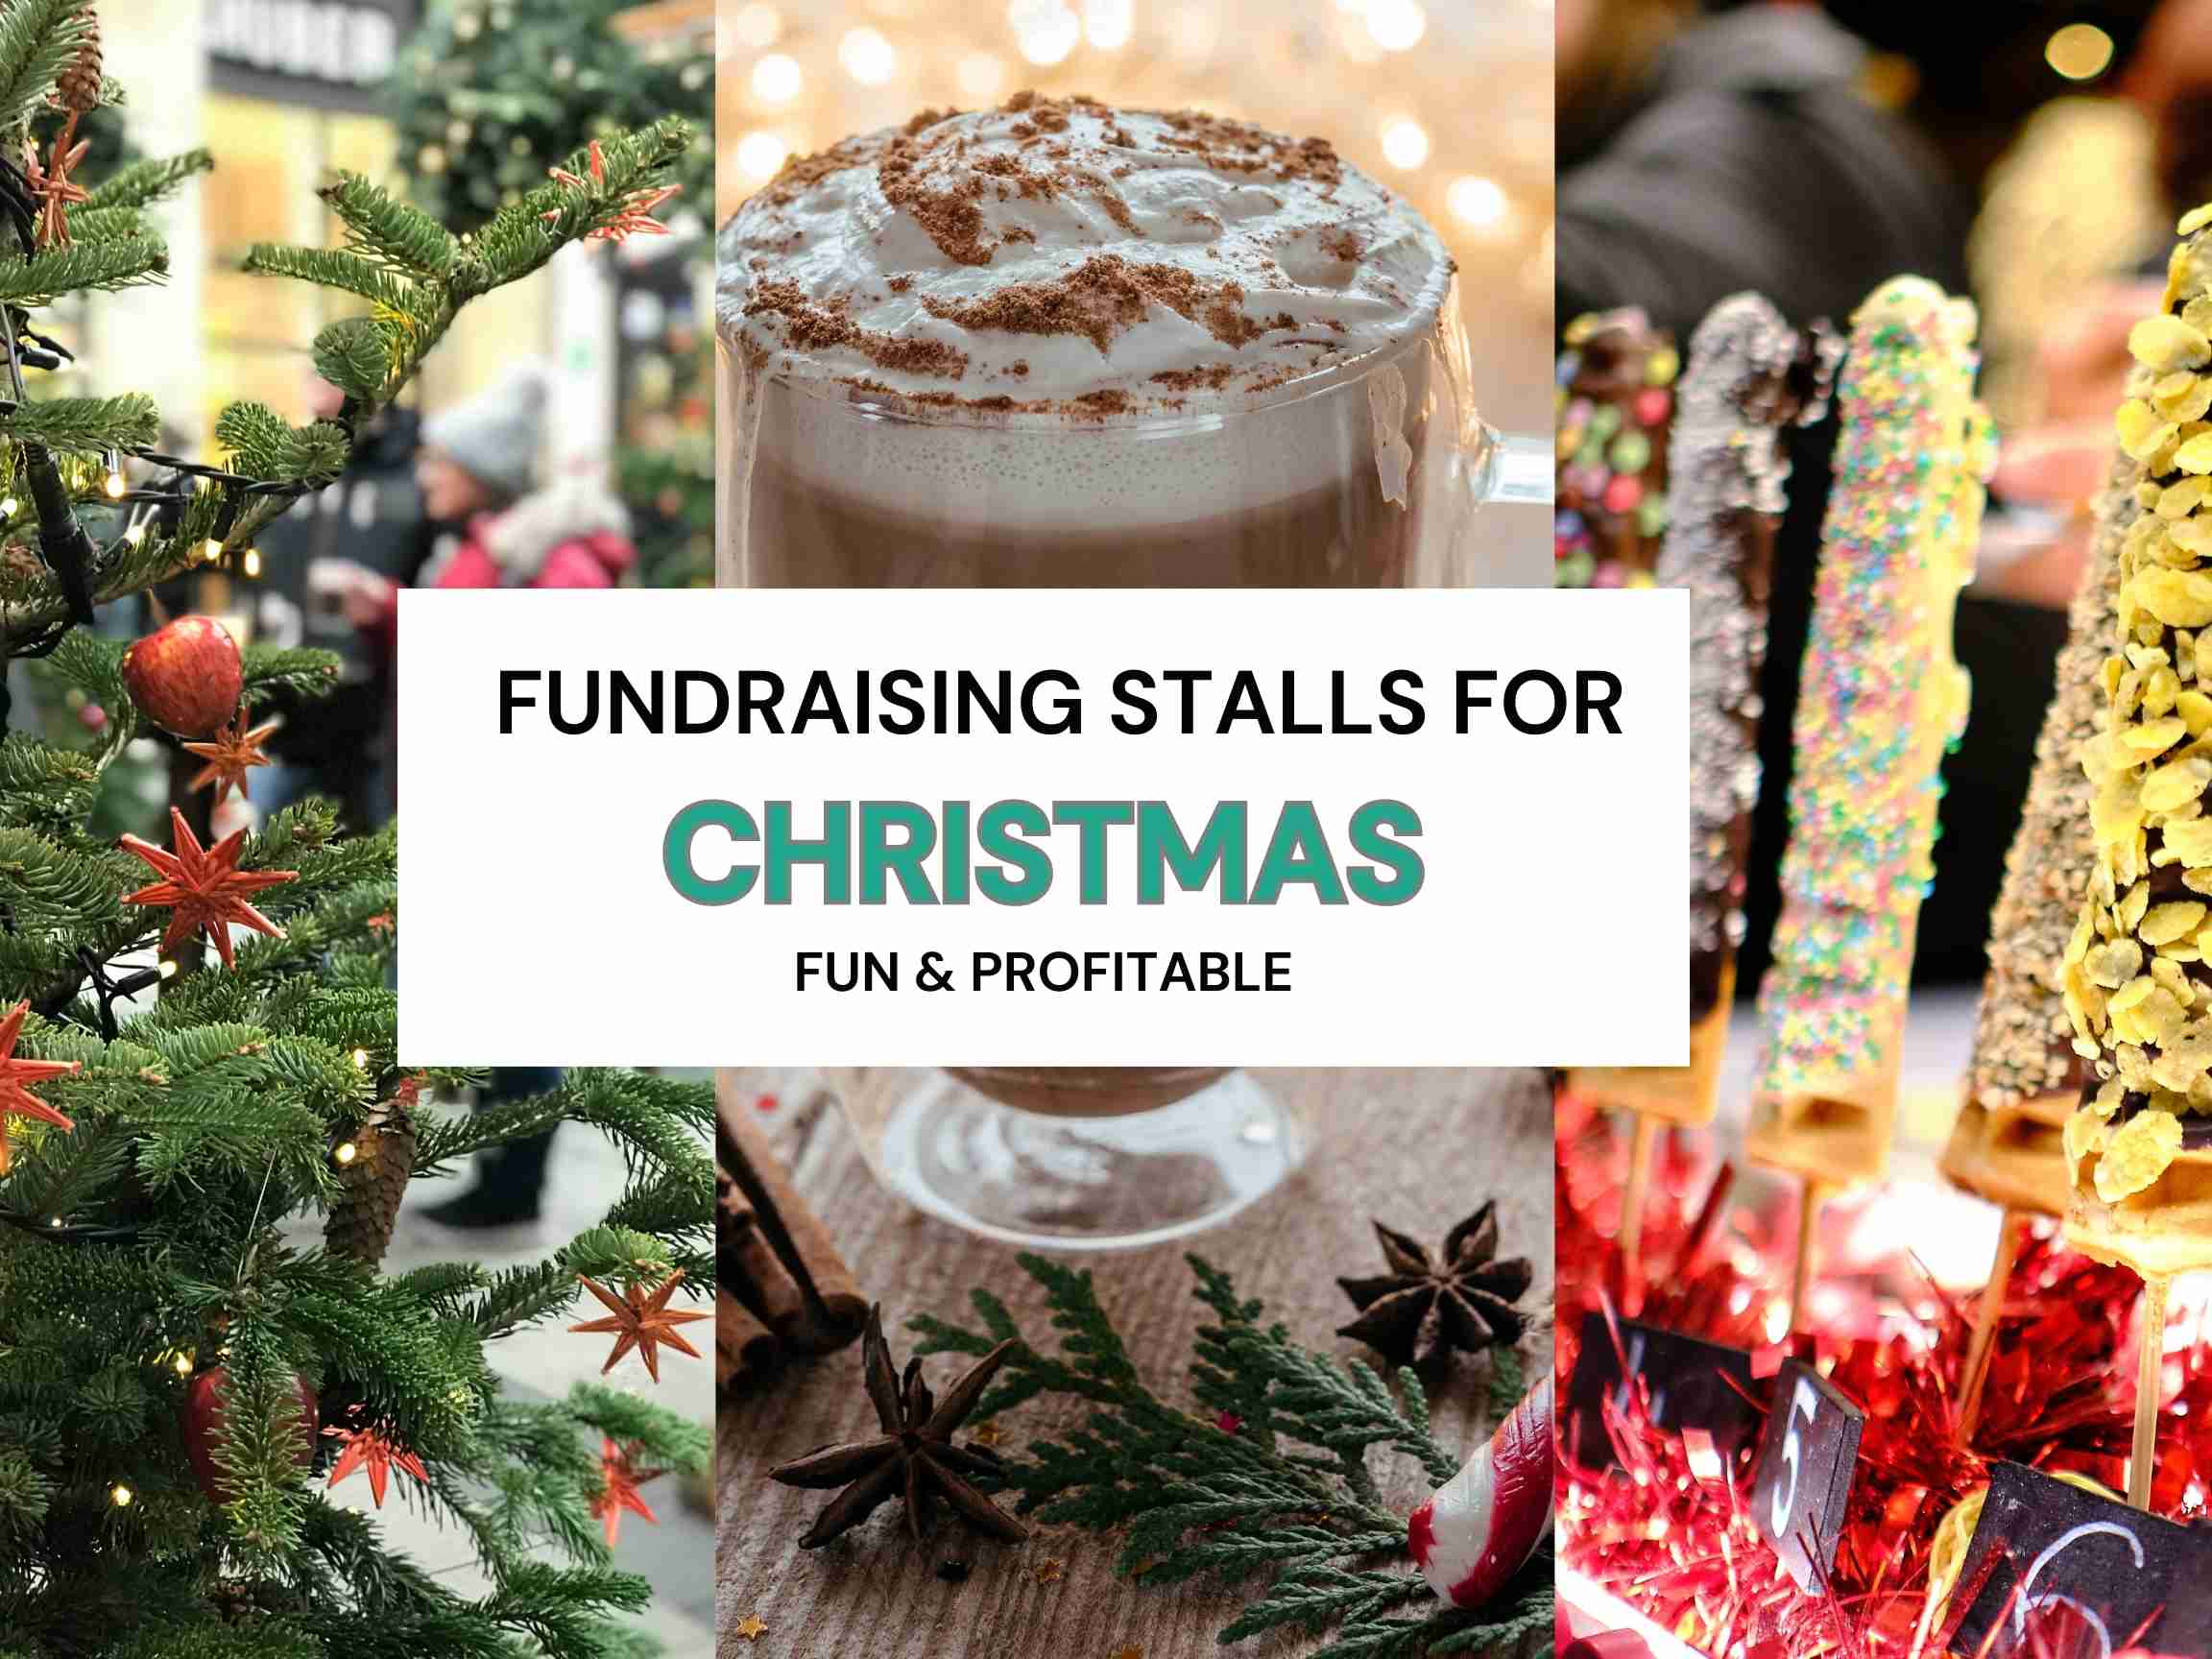 11 Christmas Stall Ideas For Fundraising: For Fun & Profits - Charity ...